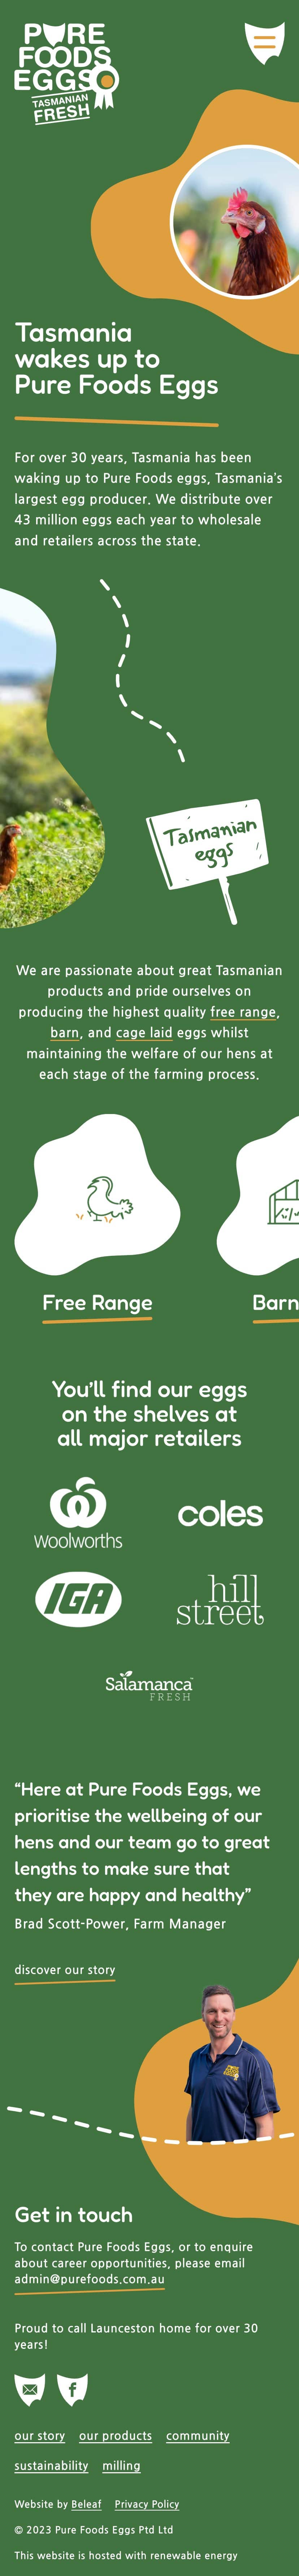 Pure Foods Eggs Homepage Mobile